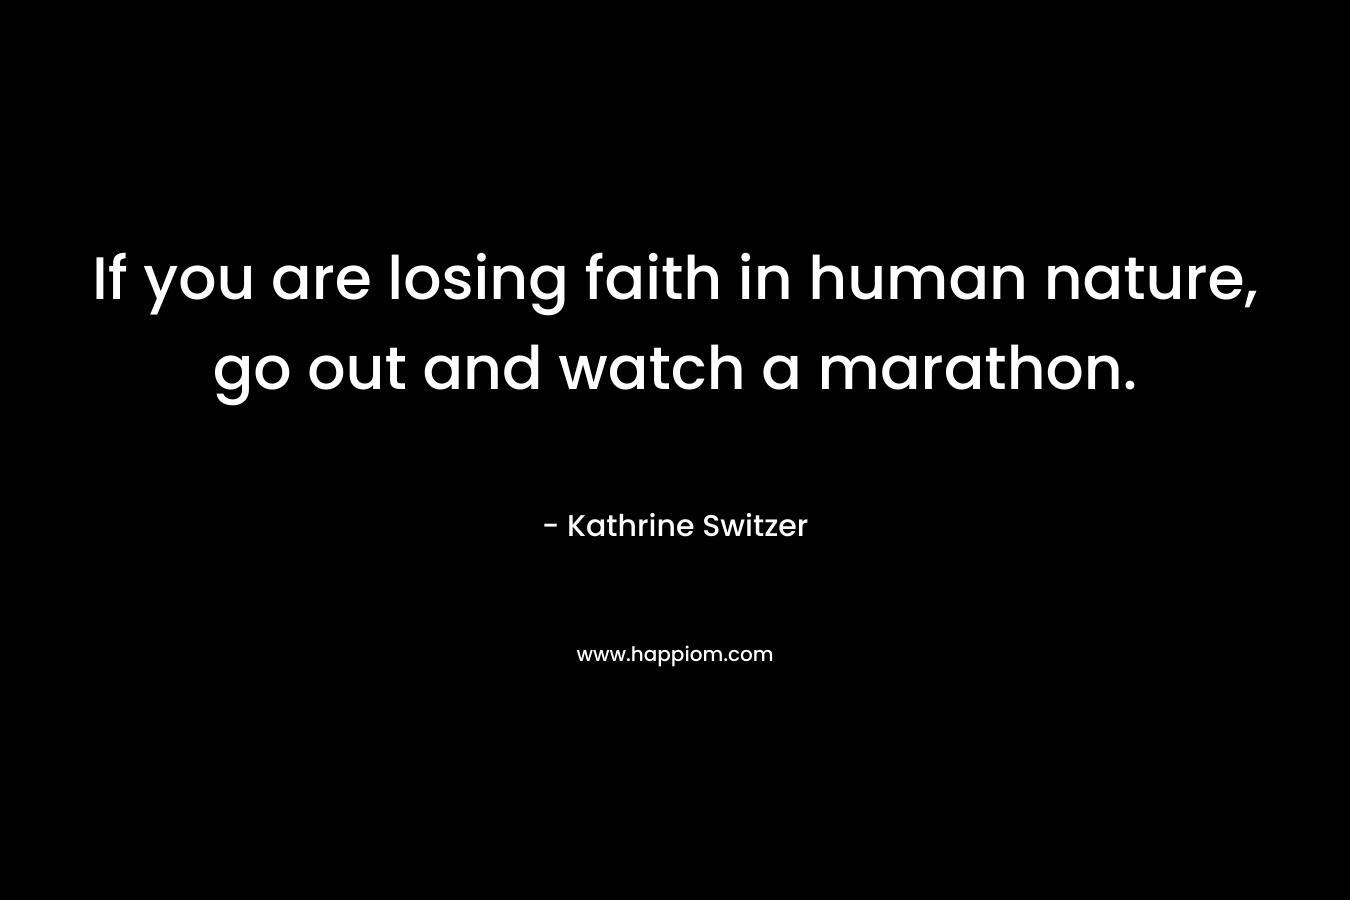 If you are losing faith in human nature, go out and watch a marathon.